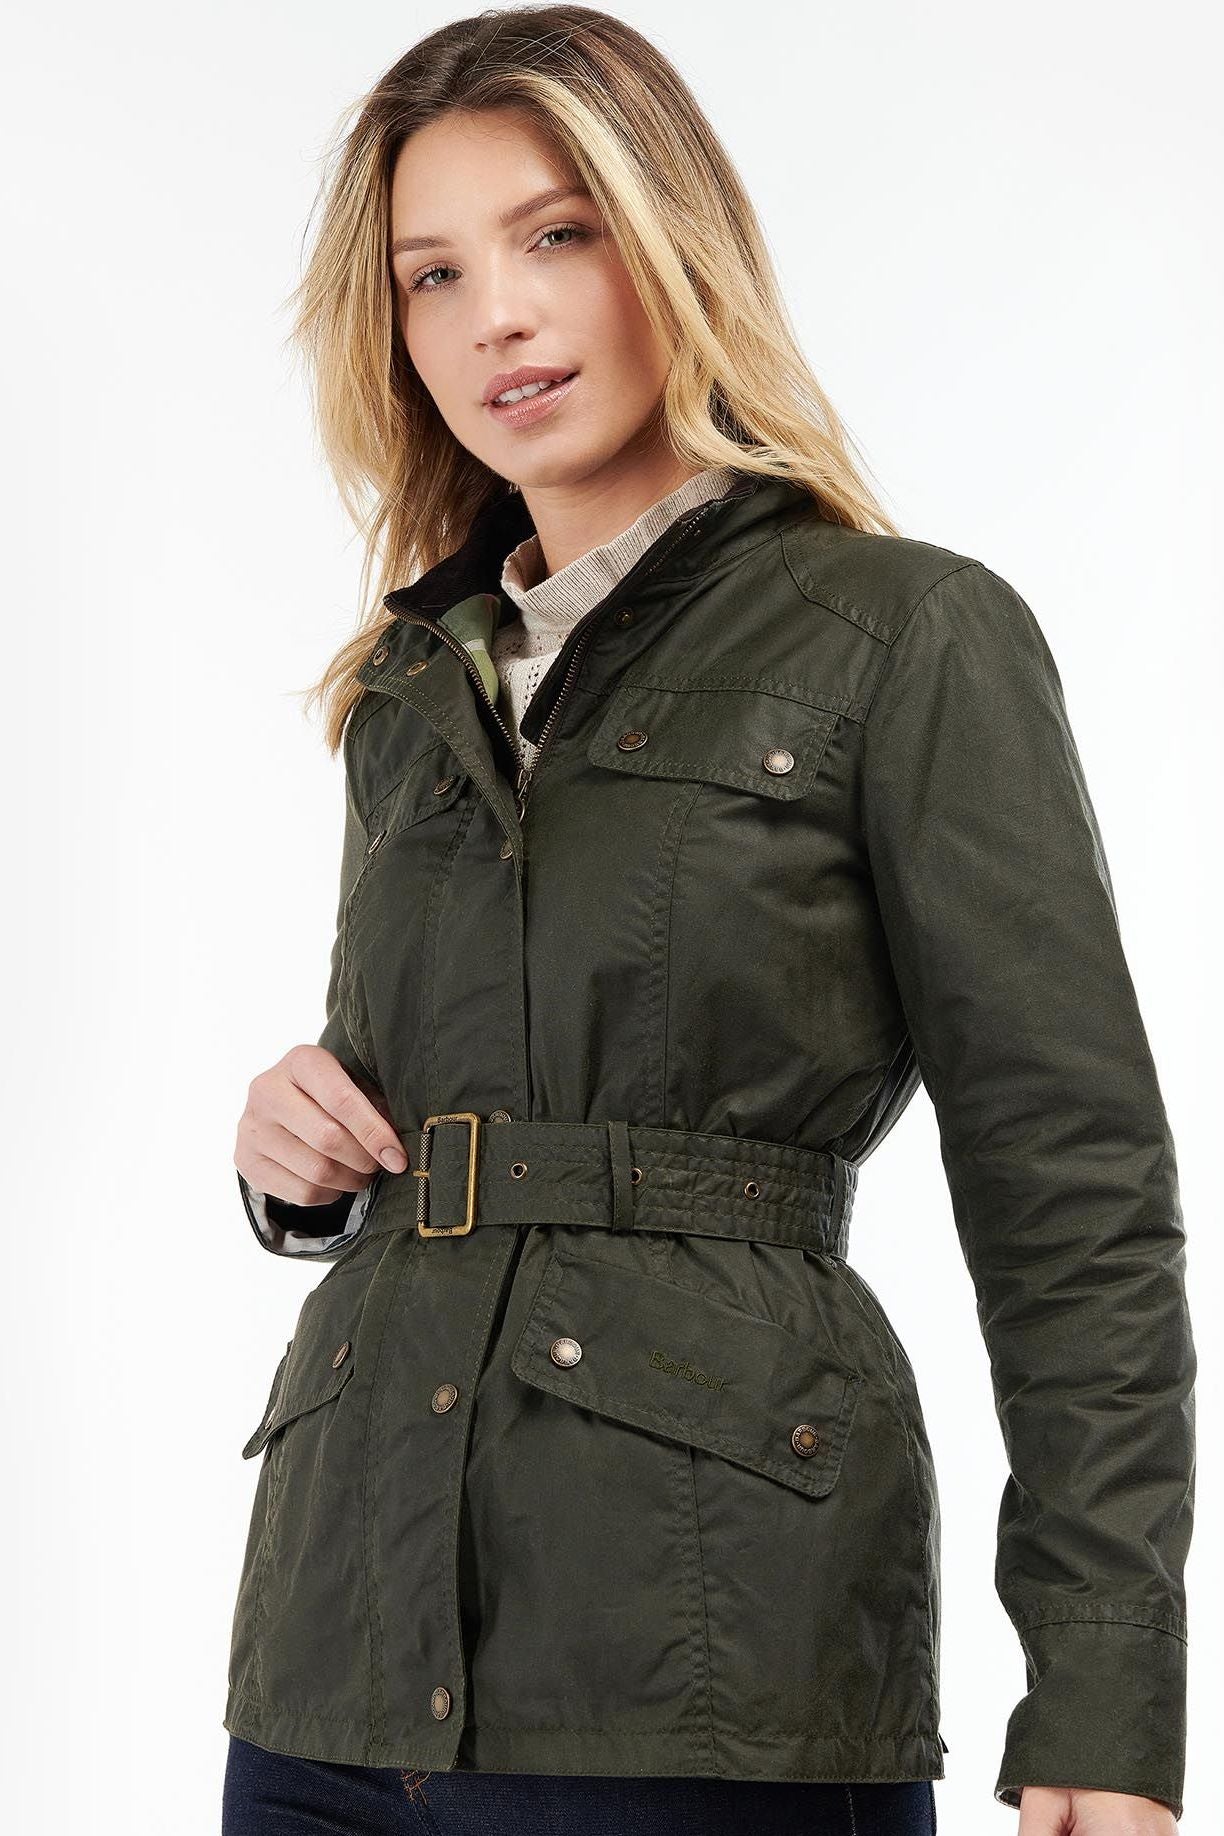 Barbour Alena new wax jacket in Olive LWX1226OL51 – Smyths Country 